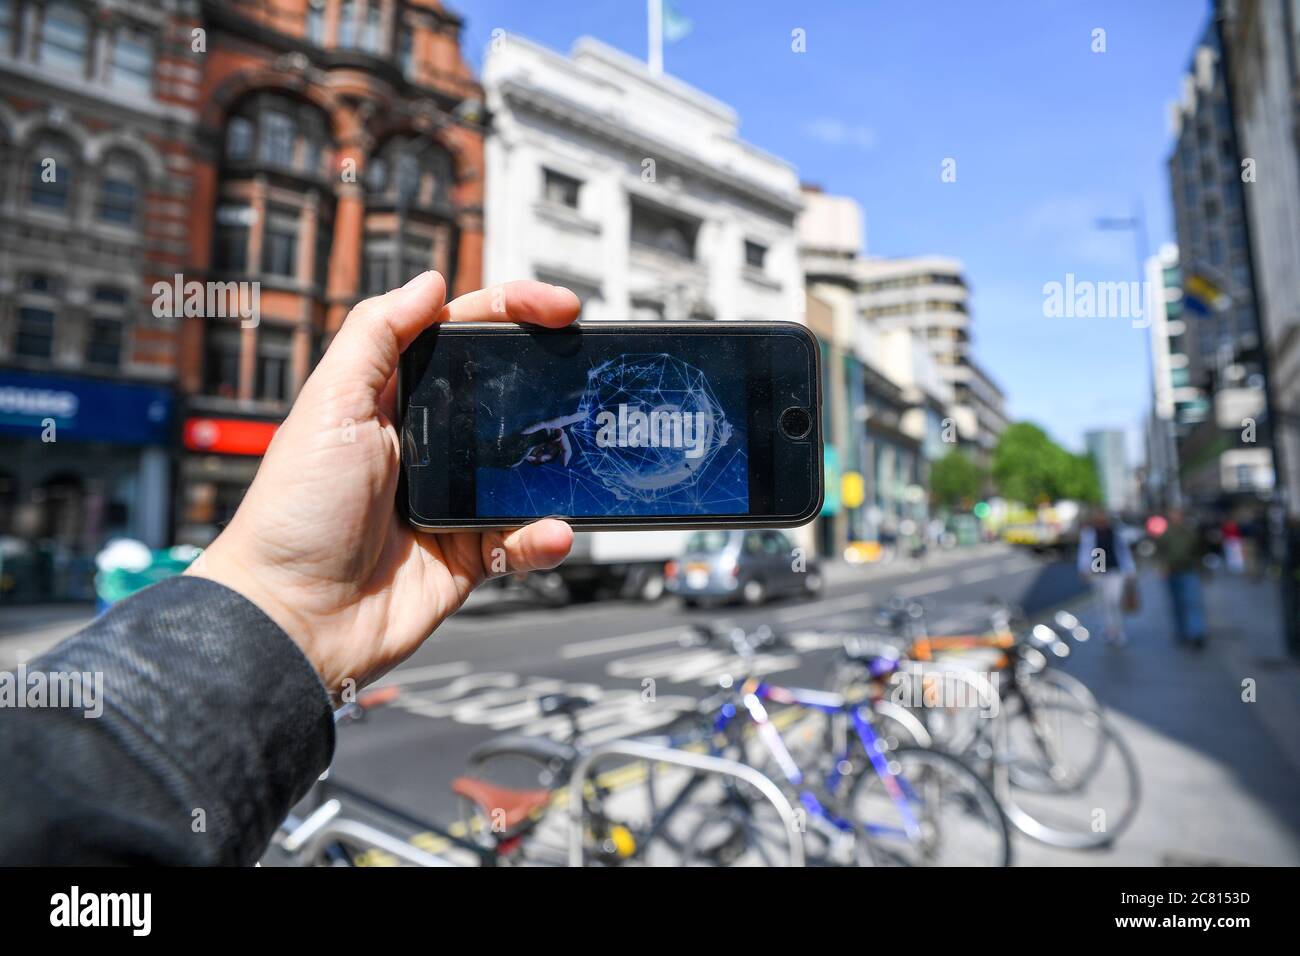 (200720) -- LONDON, July 20, 2020 (Xinhua) -- Photo taken on May 30, 2019 shows a 5G network logo on the screen of a mobile phone in London, Britain. (Xinhua/Alberto Pezzali) Stock Photo